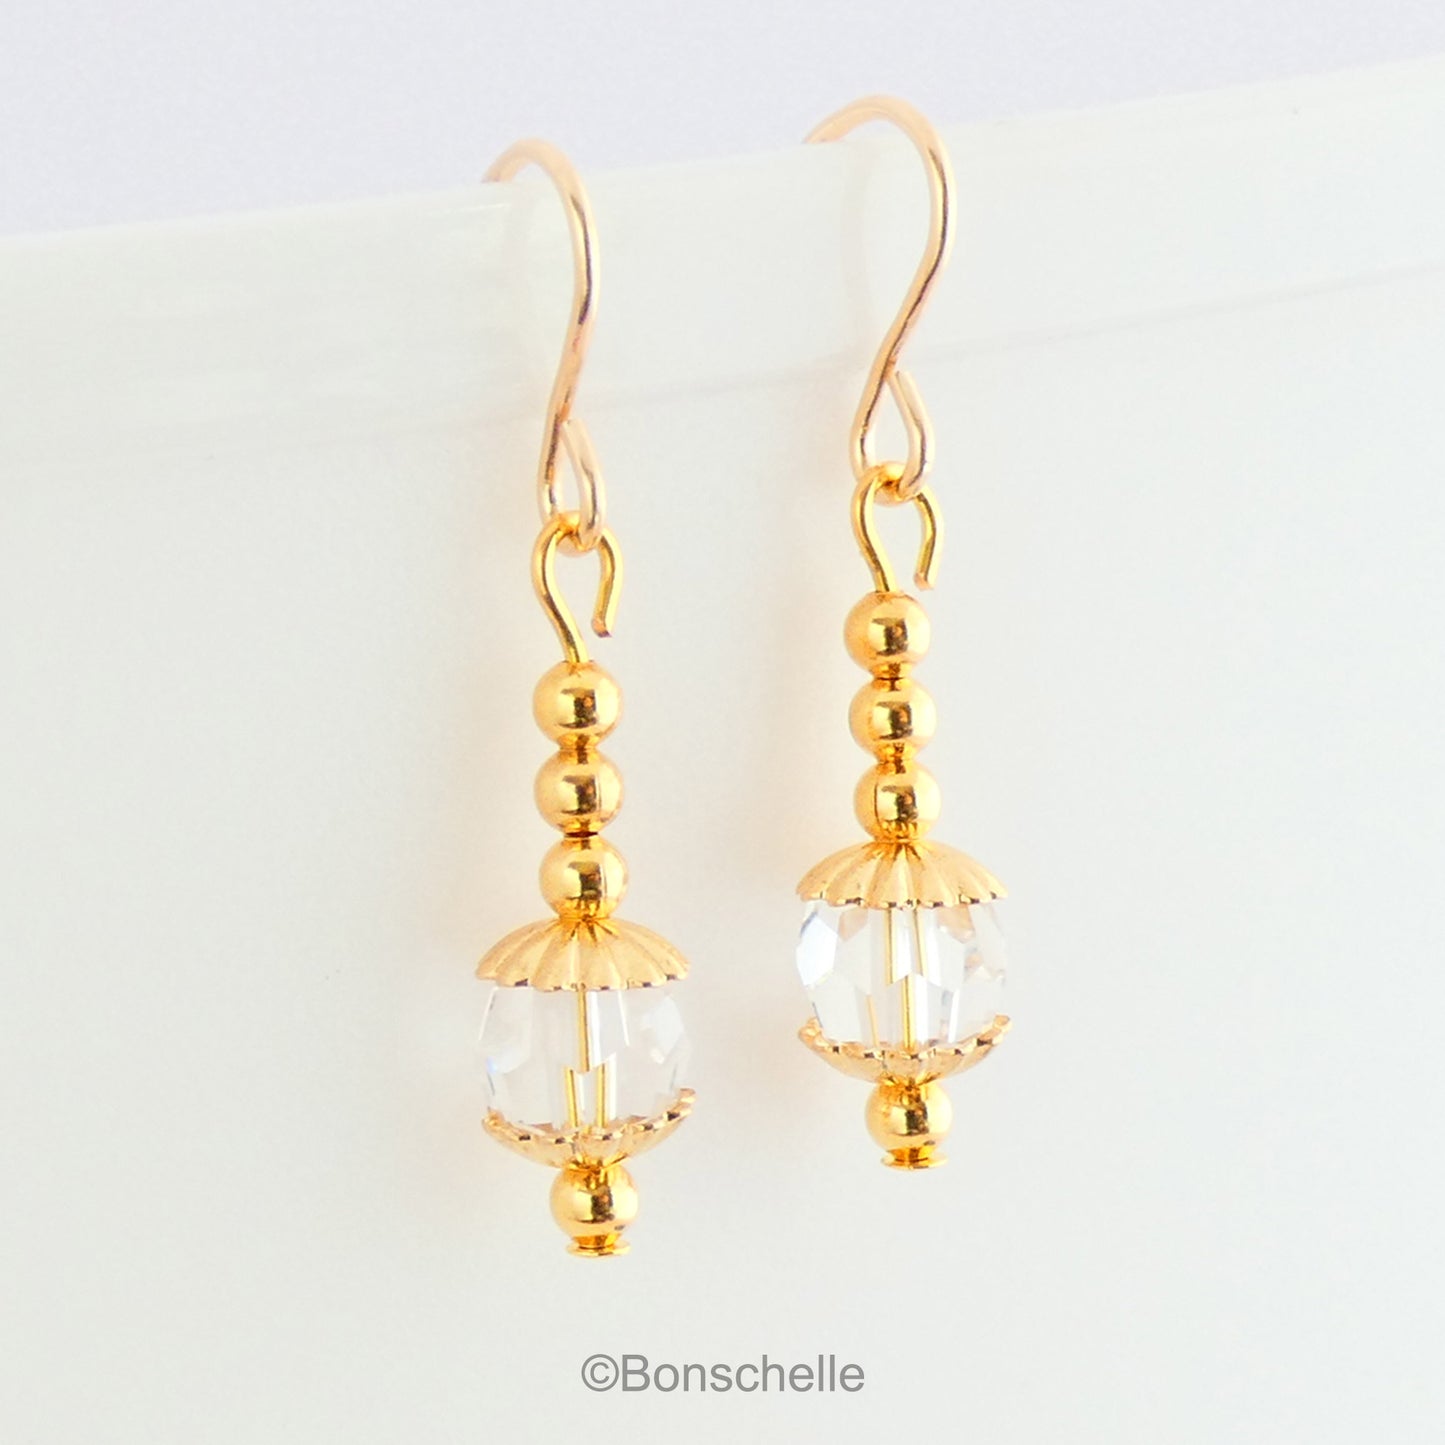 Handmade earrings with clear Swarovksi faceted crystall glass beads, gold tone small beads adn 14K gold filled earwires